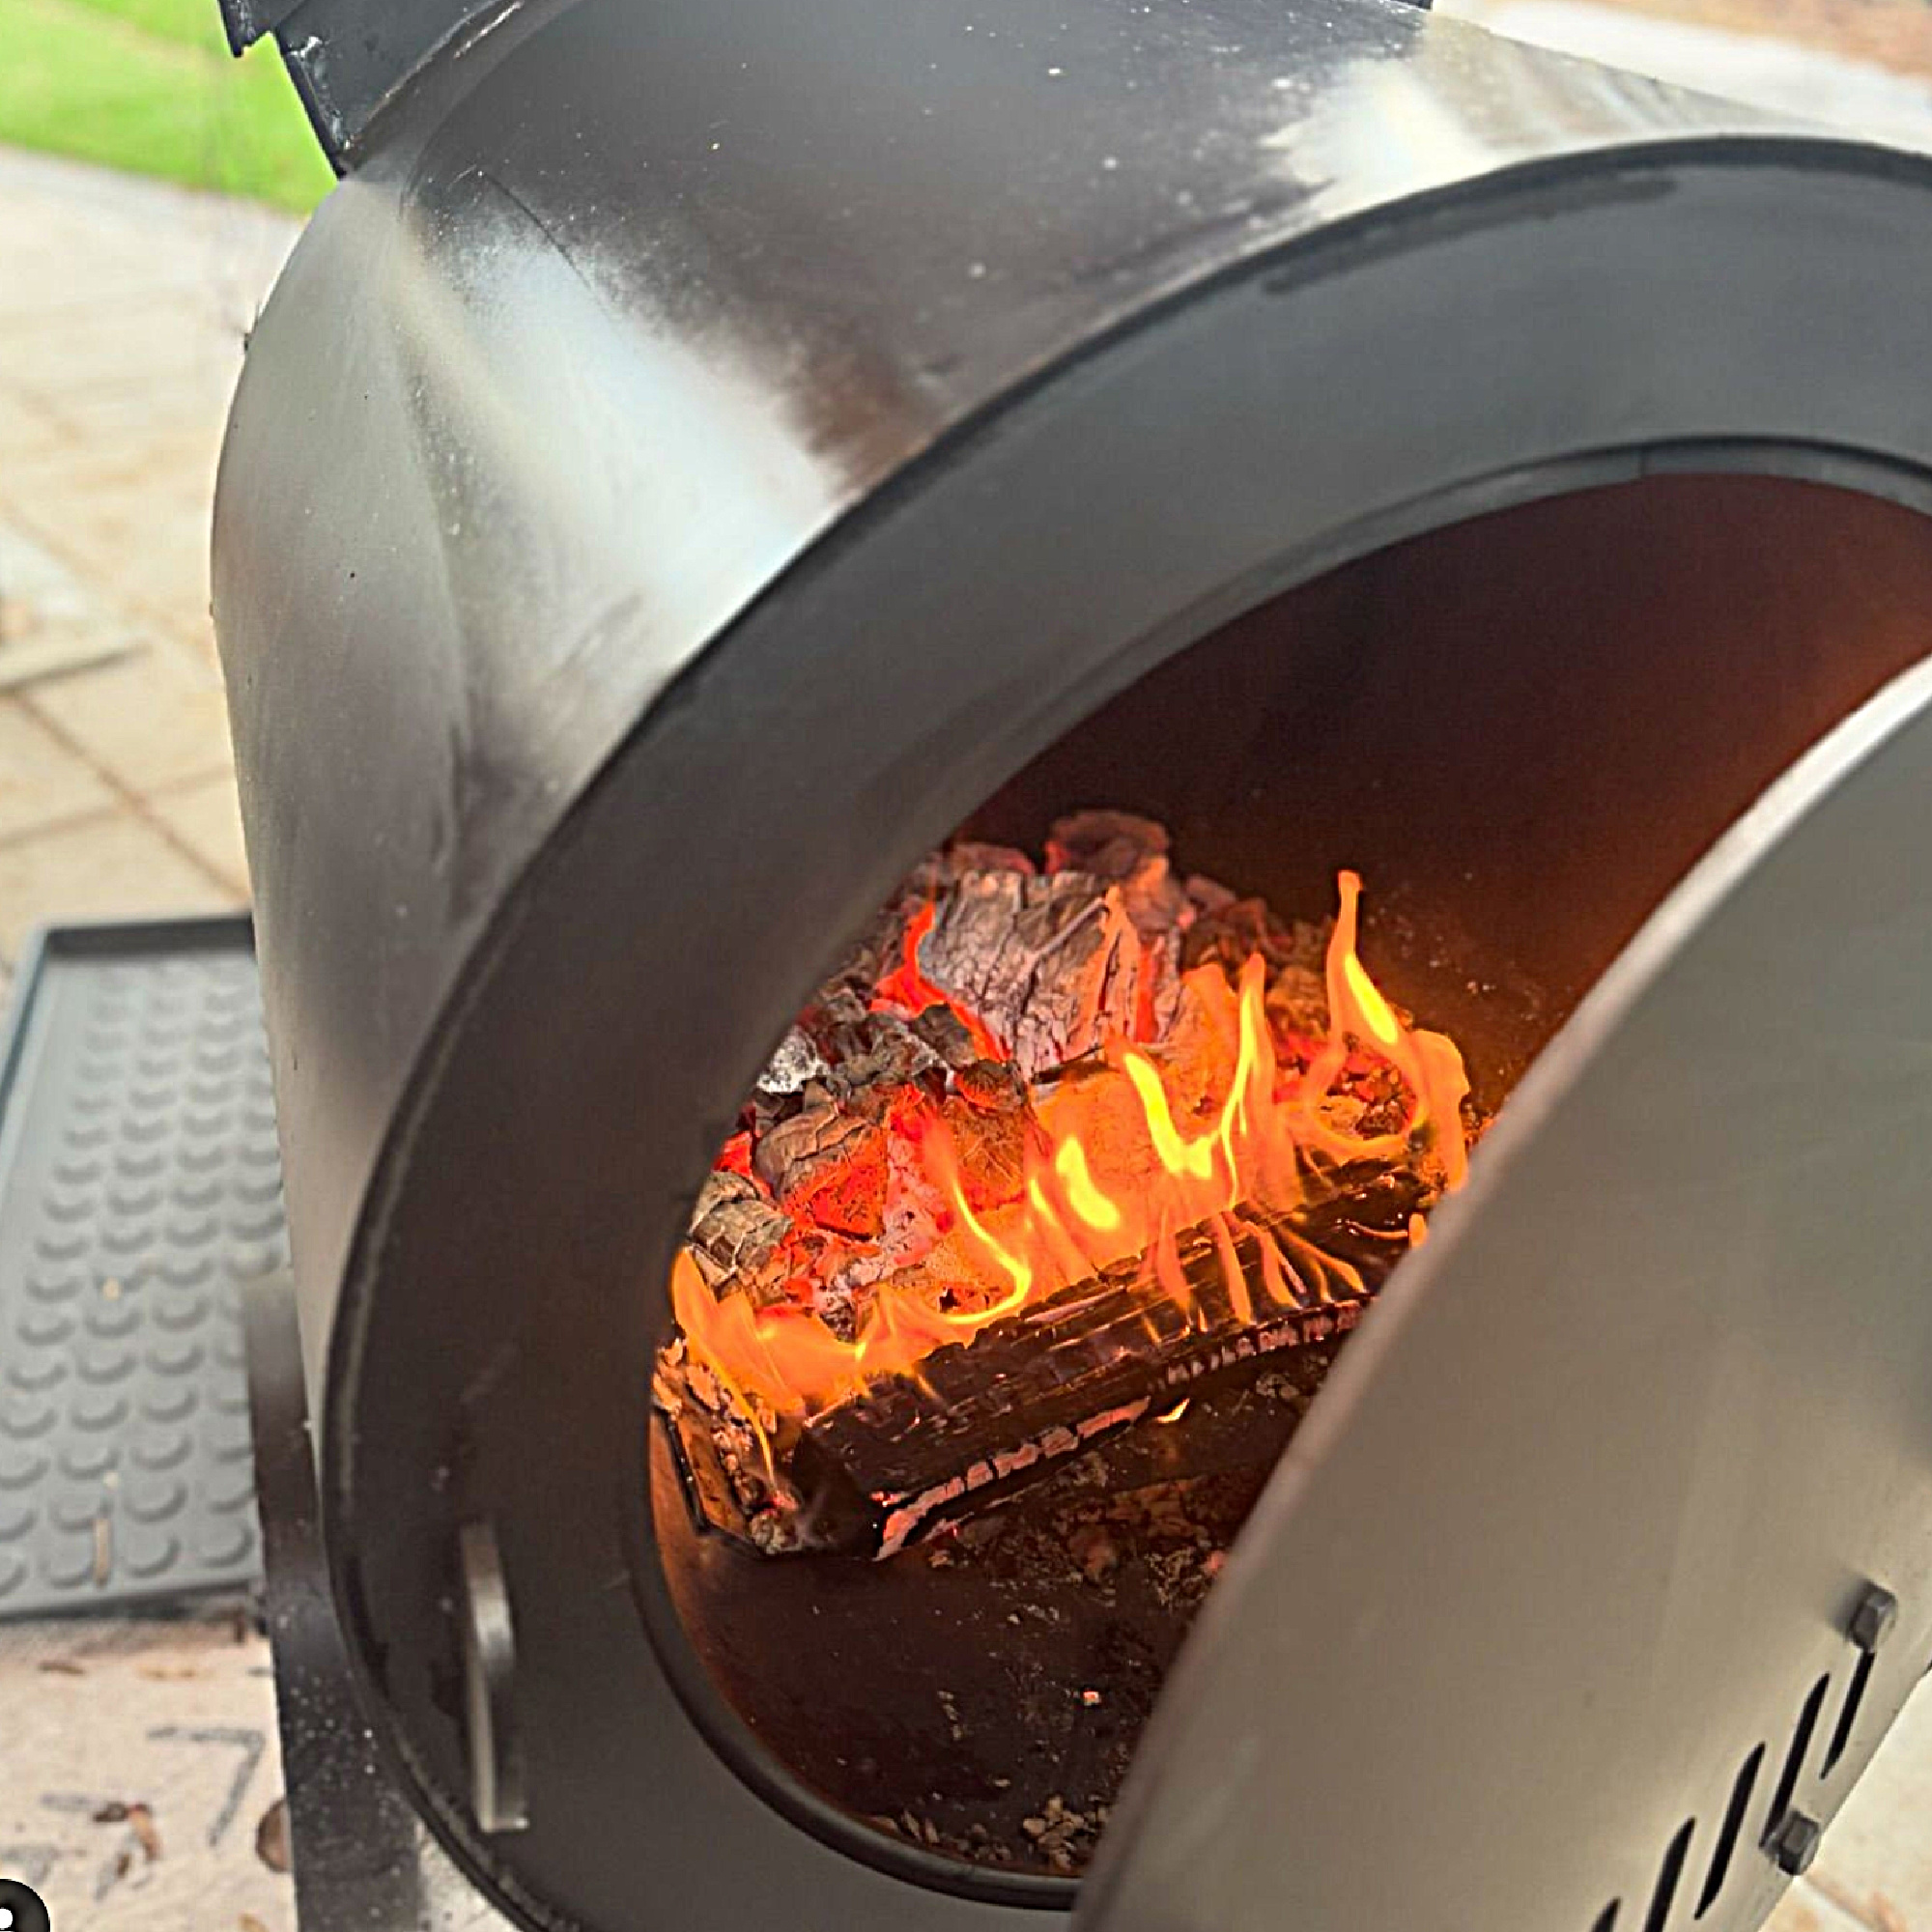 Igniting charcoal in a firebox of an offset smoker